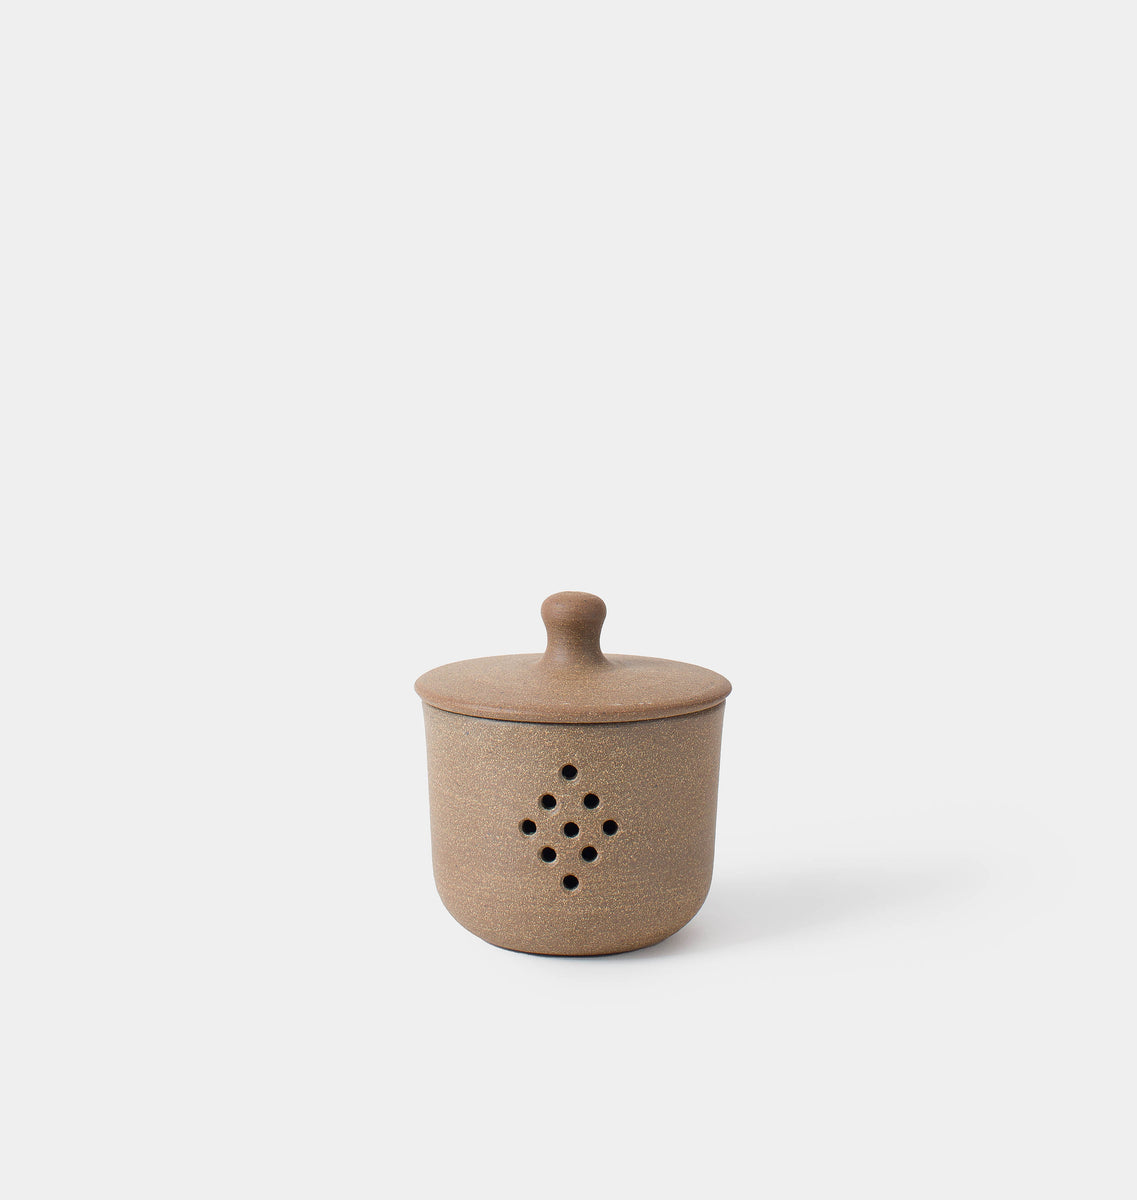 Sawyer Ceramics French Ceramic Butter Keeper on Food52